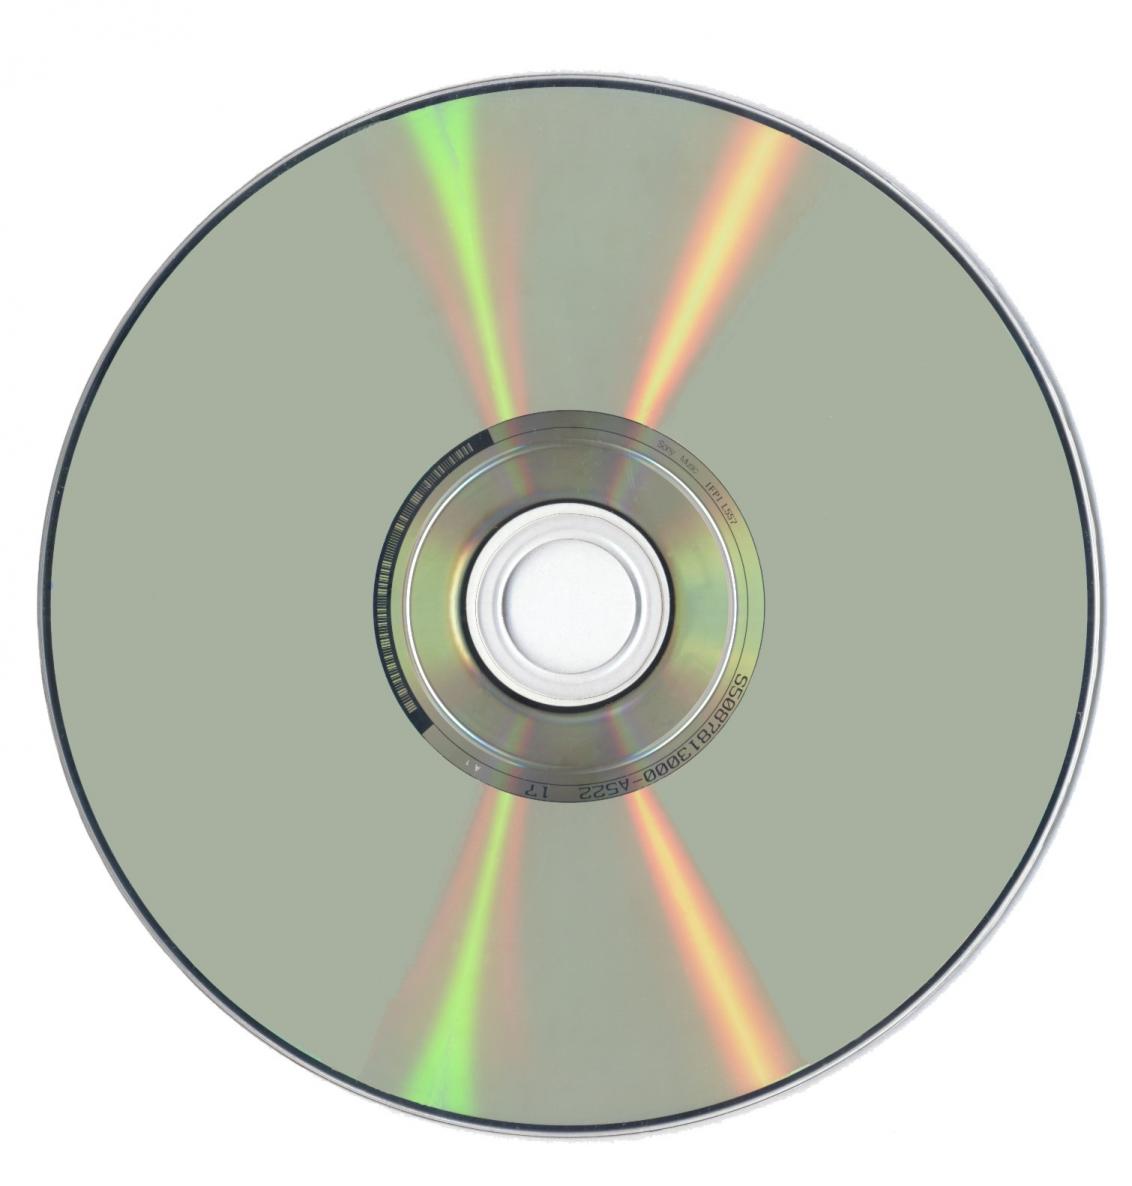 How To Convert A Multi-CD DivX/XviD With AC3 Audio To DVD-R